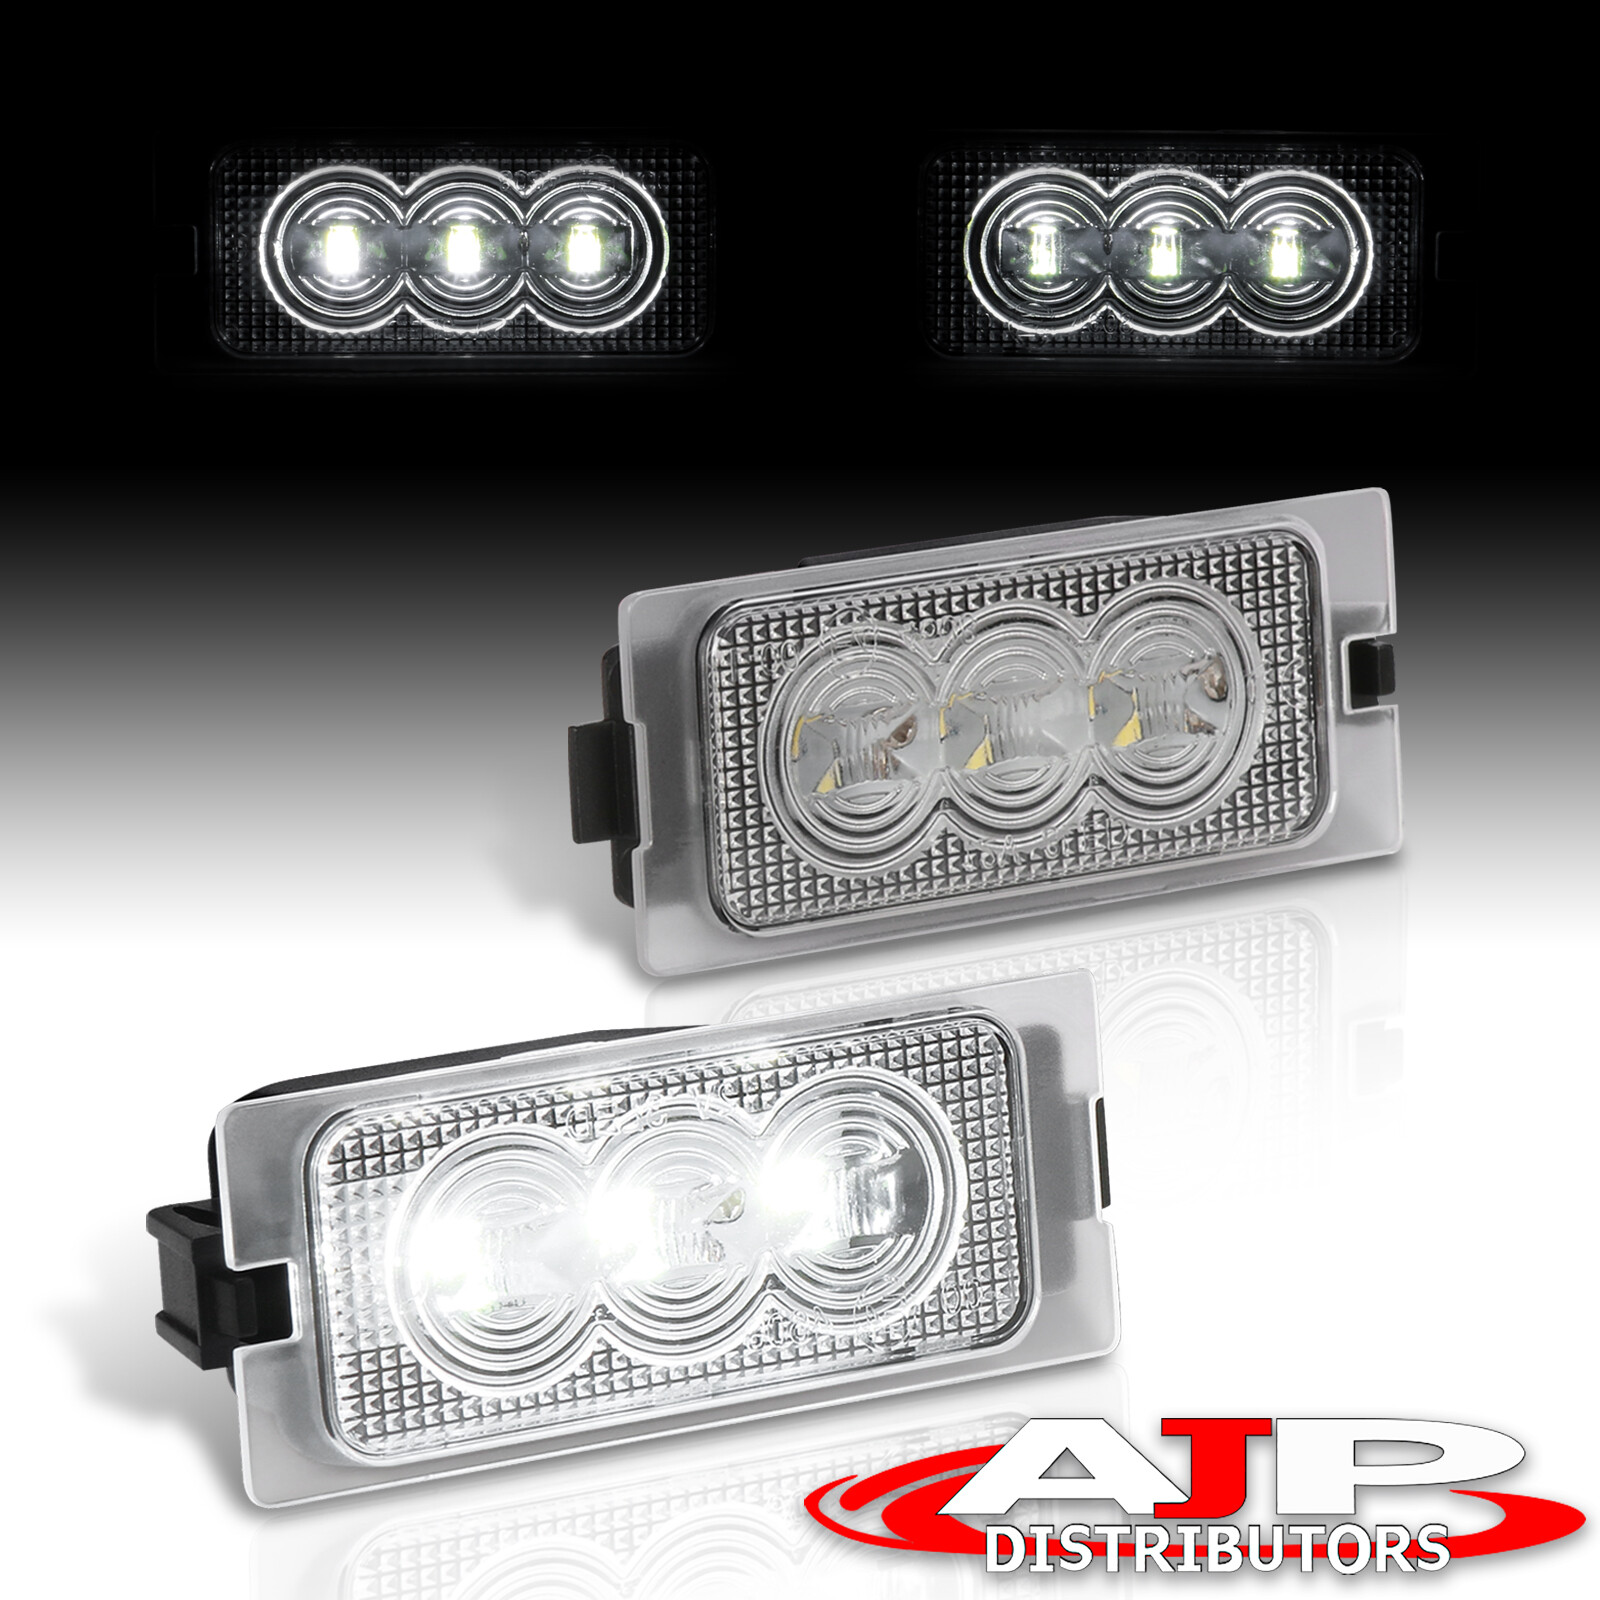 Bright White Rear LED License Plate Lights Housing Lamps For Ford Edge Escape | eBay 2017 Ford Escape License Plate Bulb Replacement